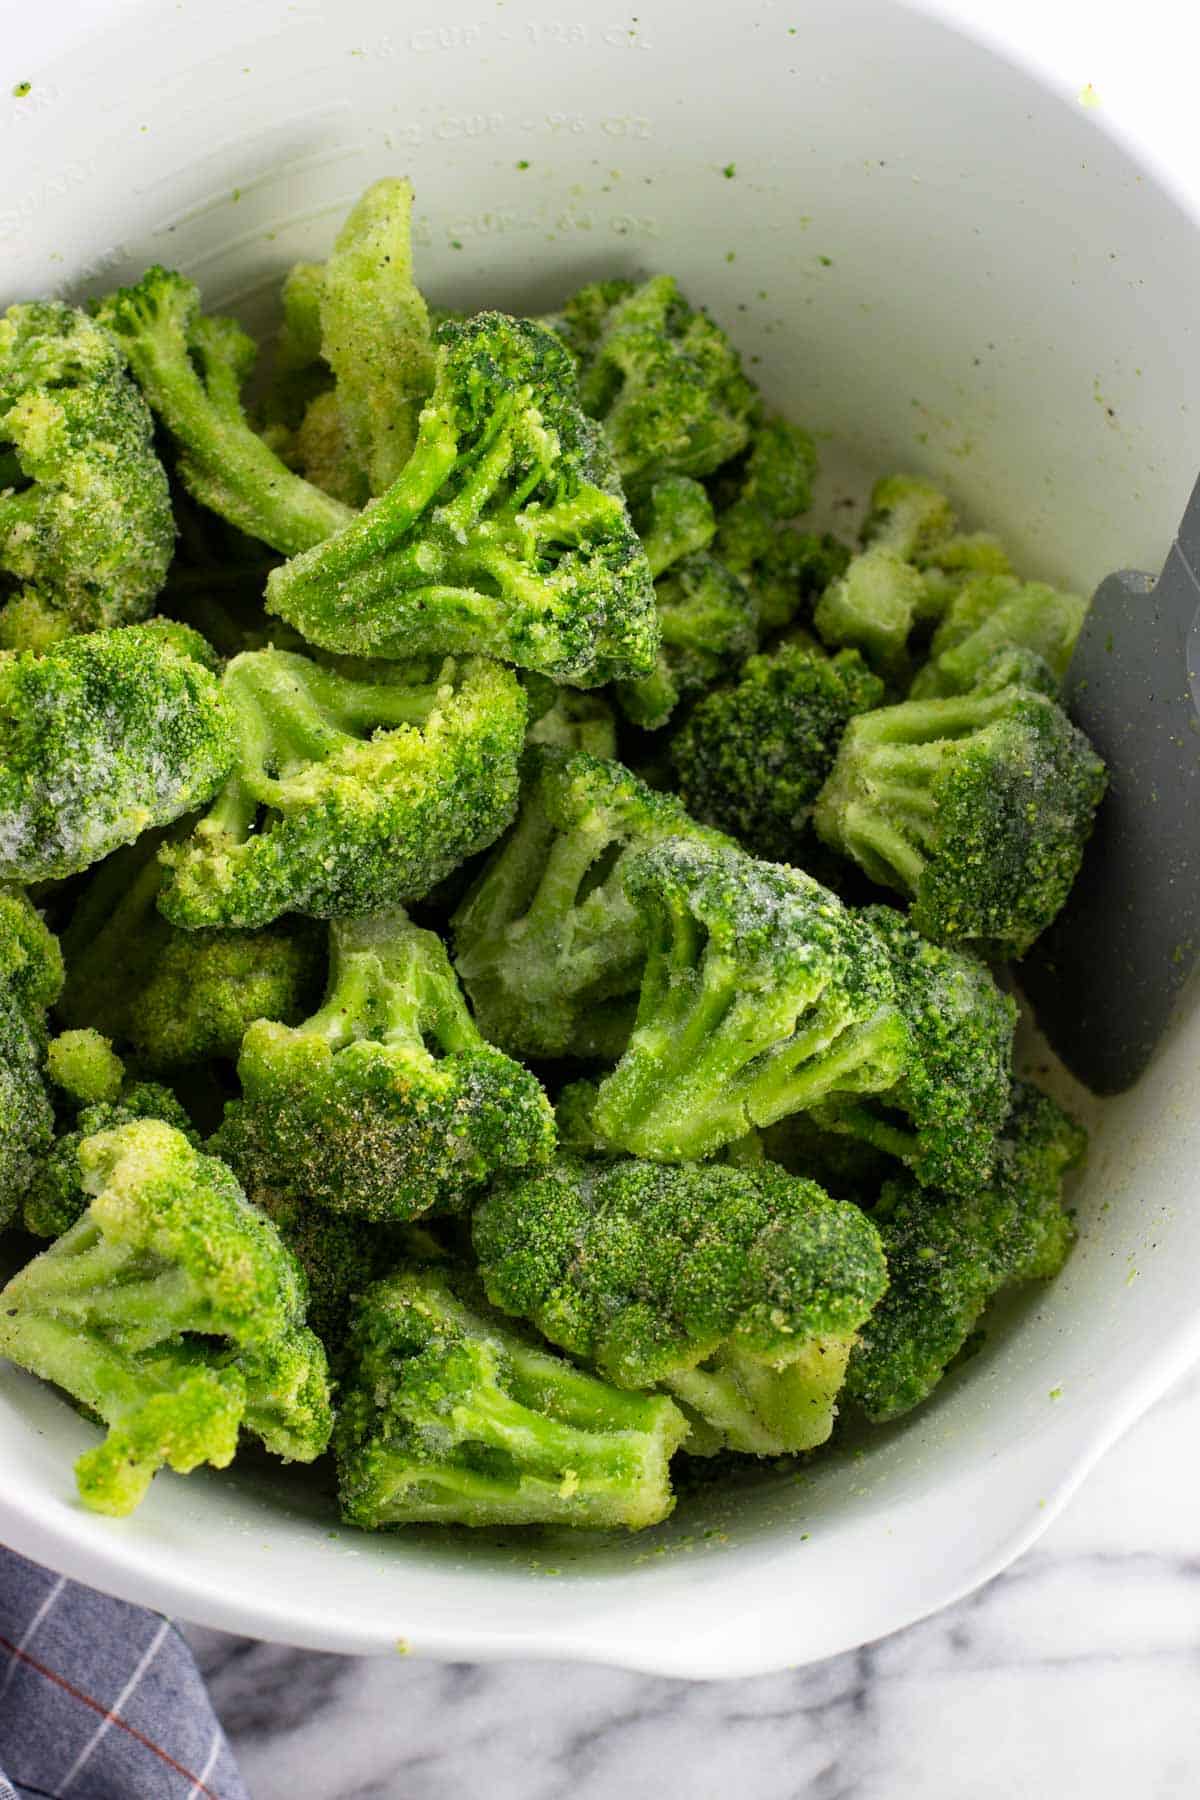 Frozen broccoli in a mixing bowl drizzled with oil and spices.